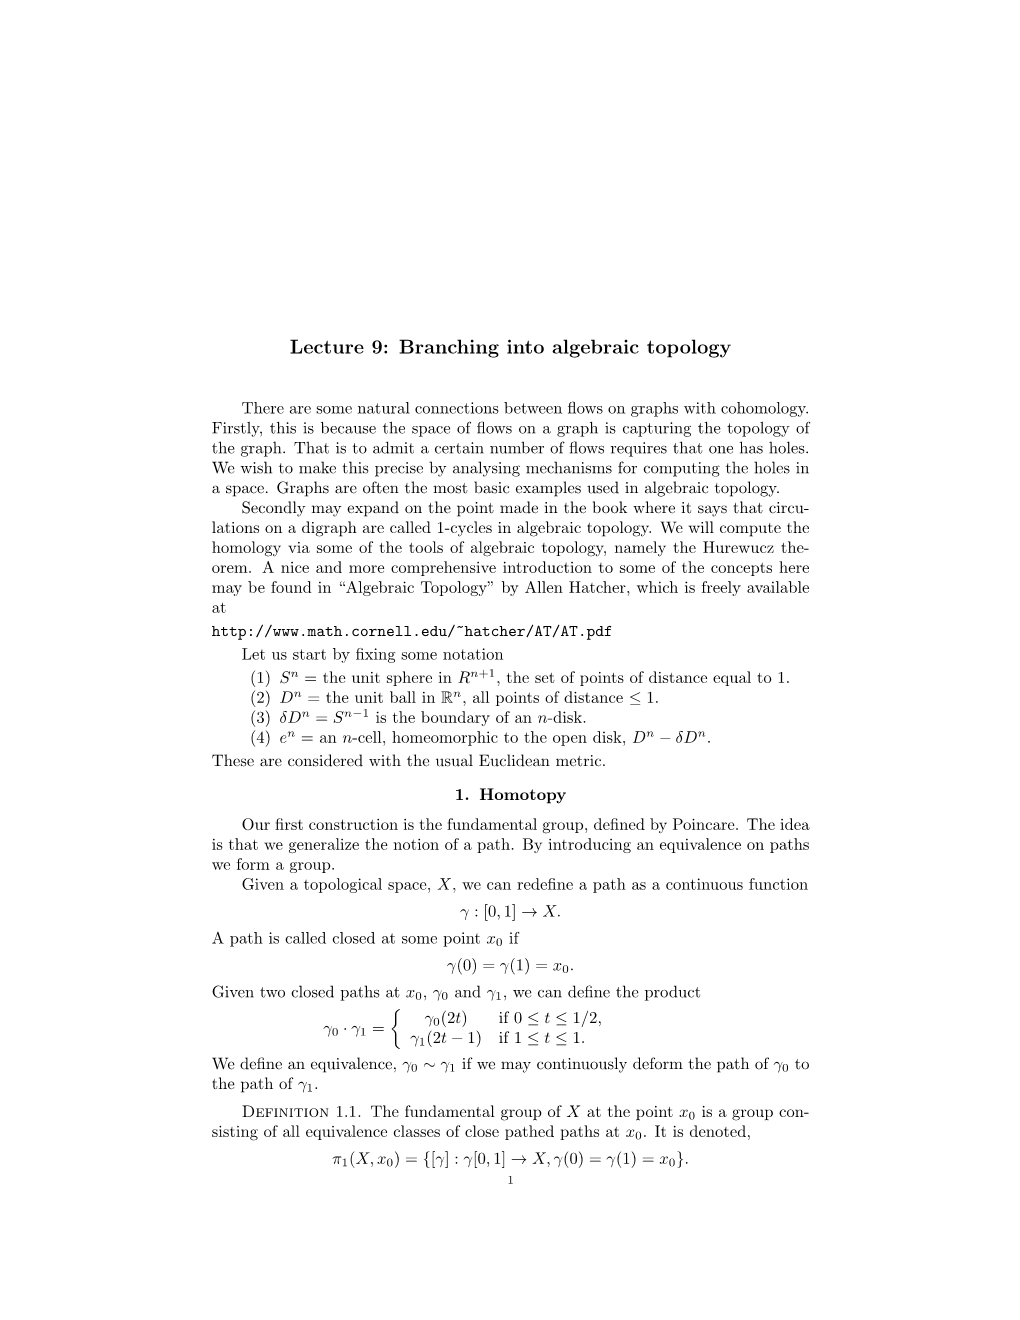 Lecture 9: Branching Into Algebraic Topology